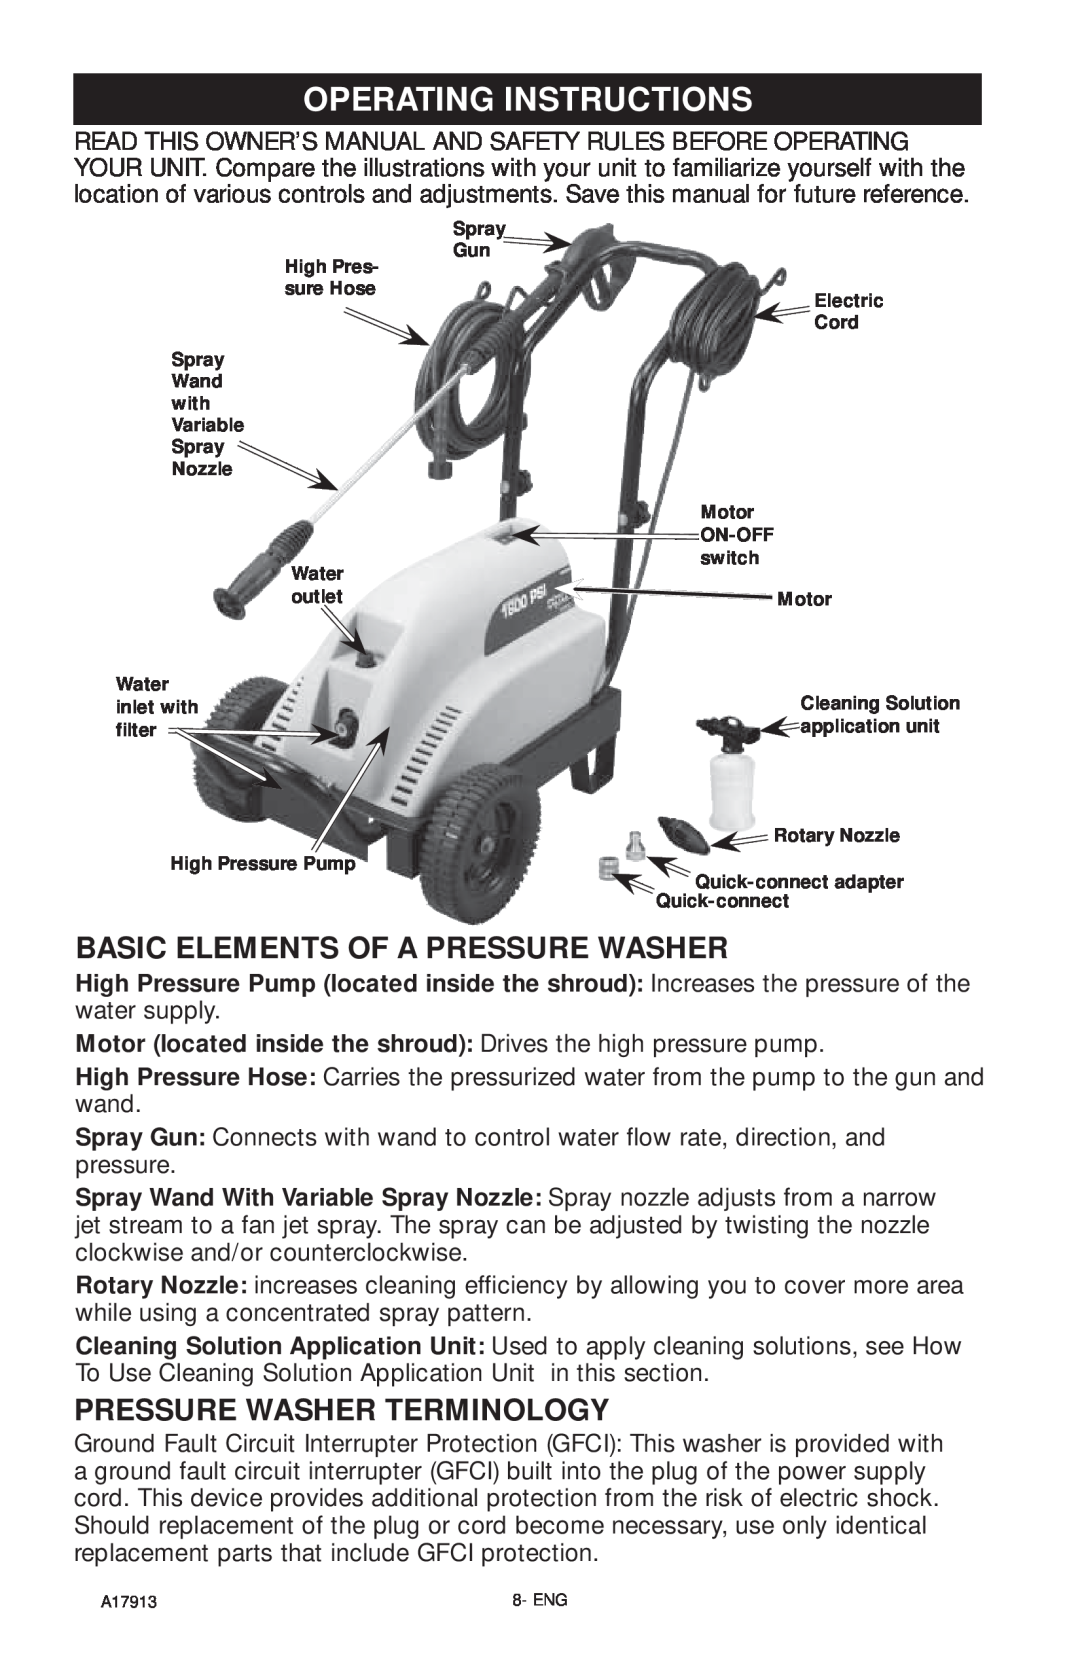 DeVillbiss Air Power Company VR1600E, A17913 Operating Instructions, Basic Elements Of A Pressure Washer 